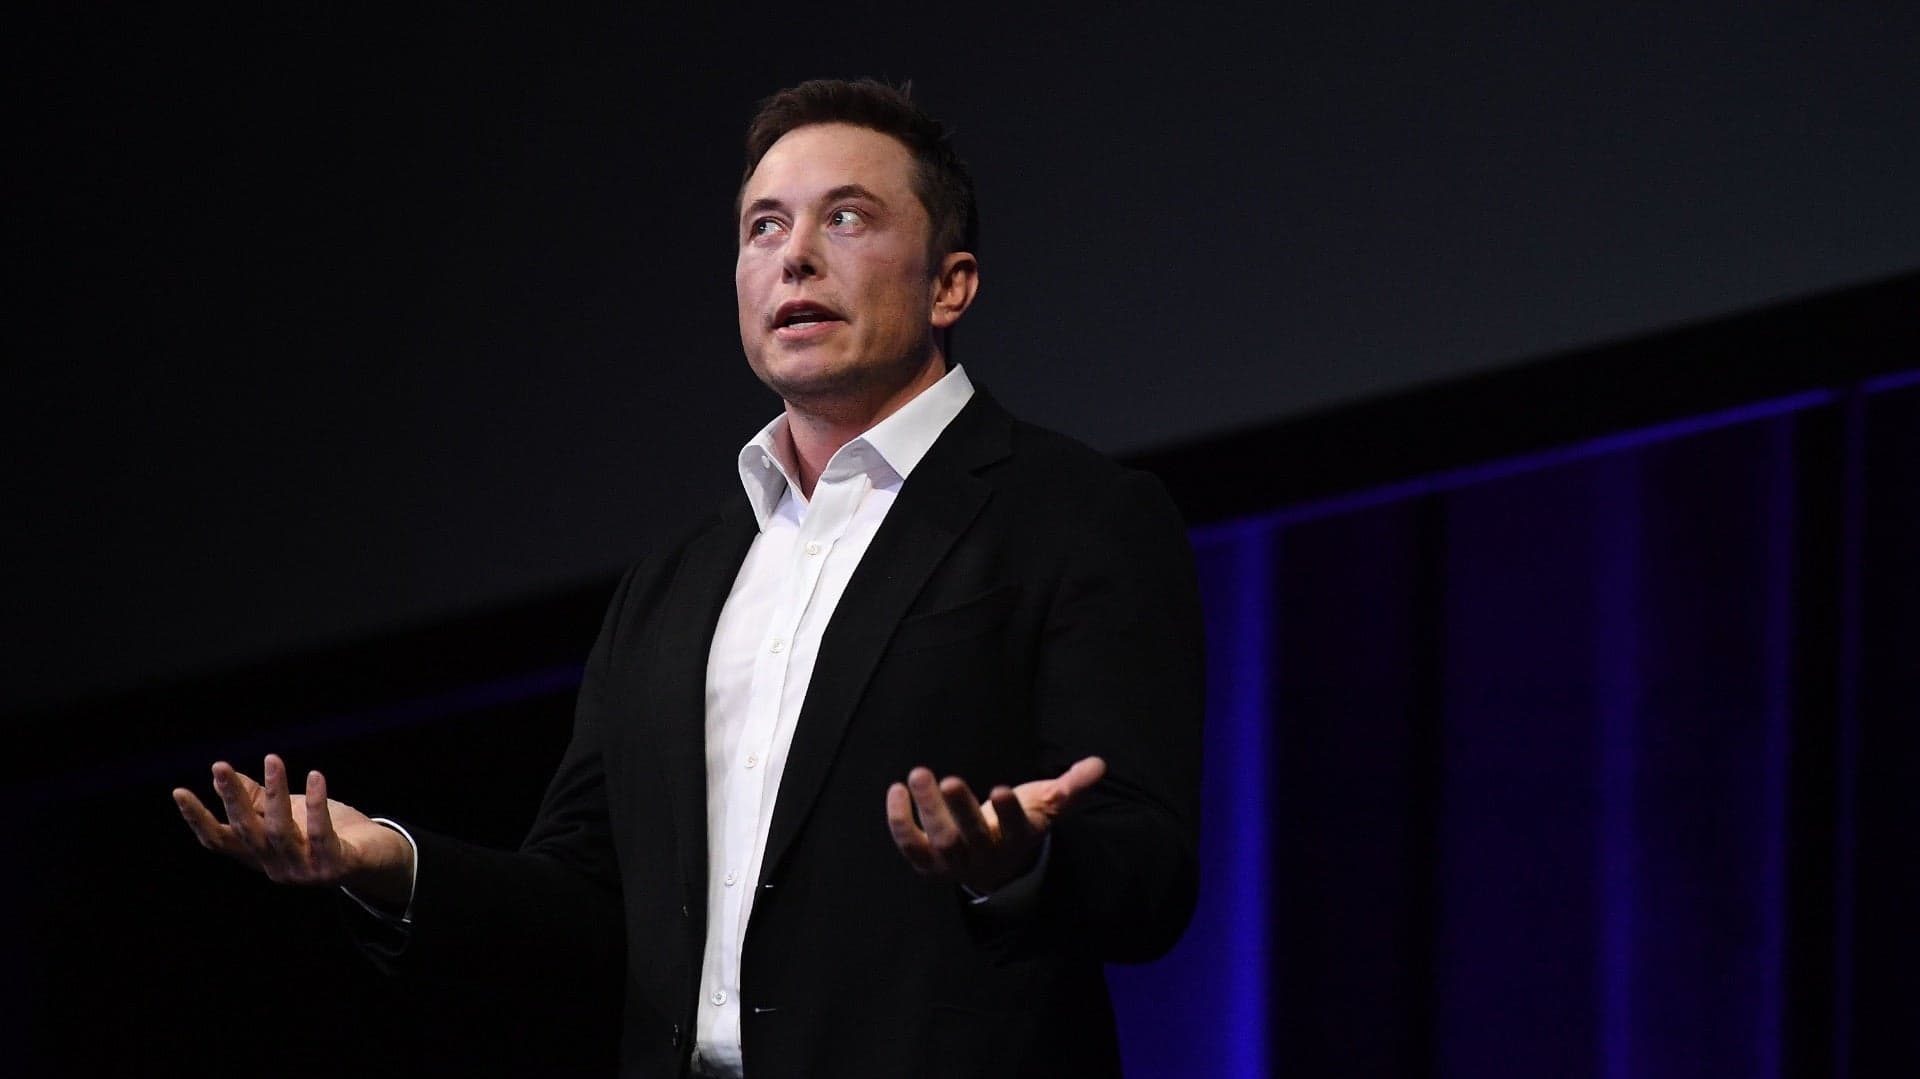 Elon Musk Will Forego Salary if Tesla Doesn’t Meet Expectations